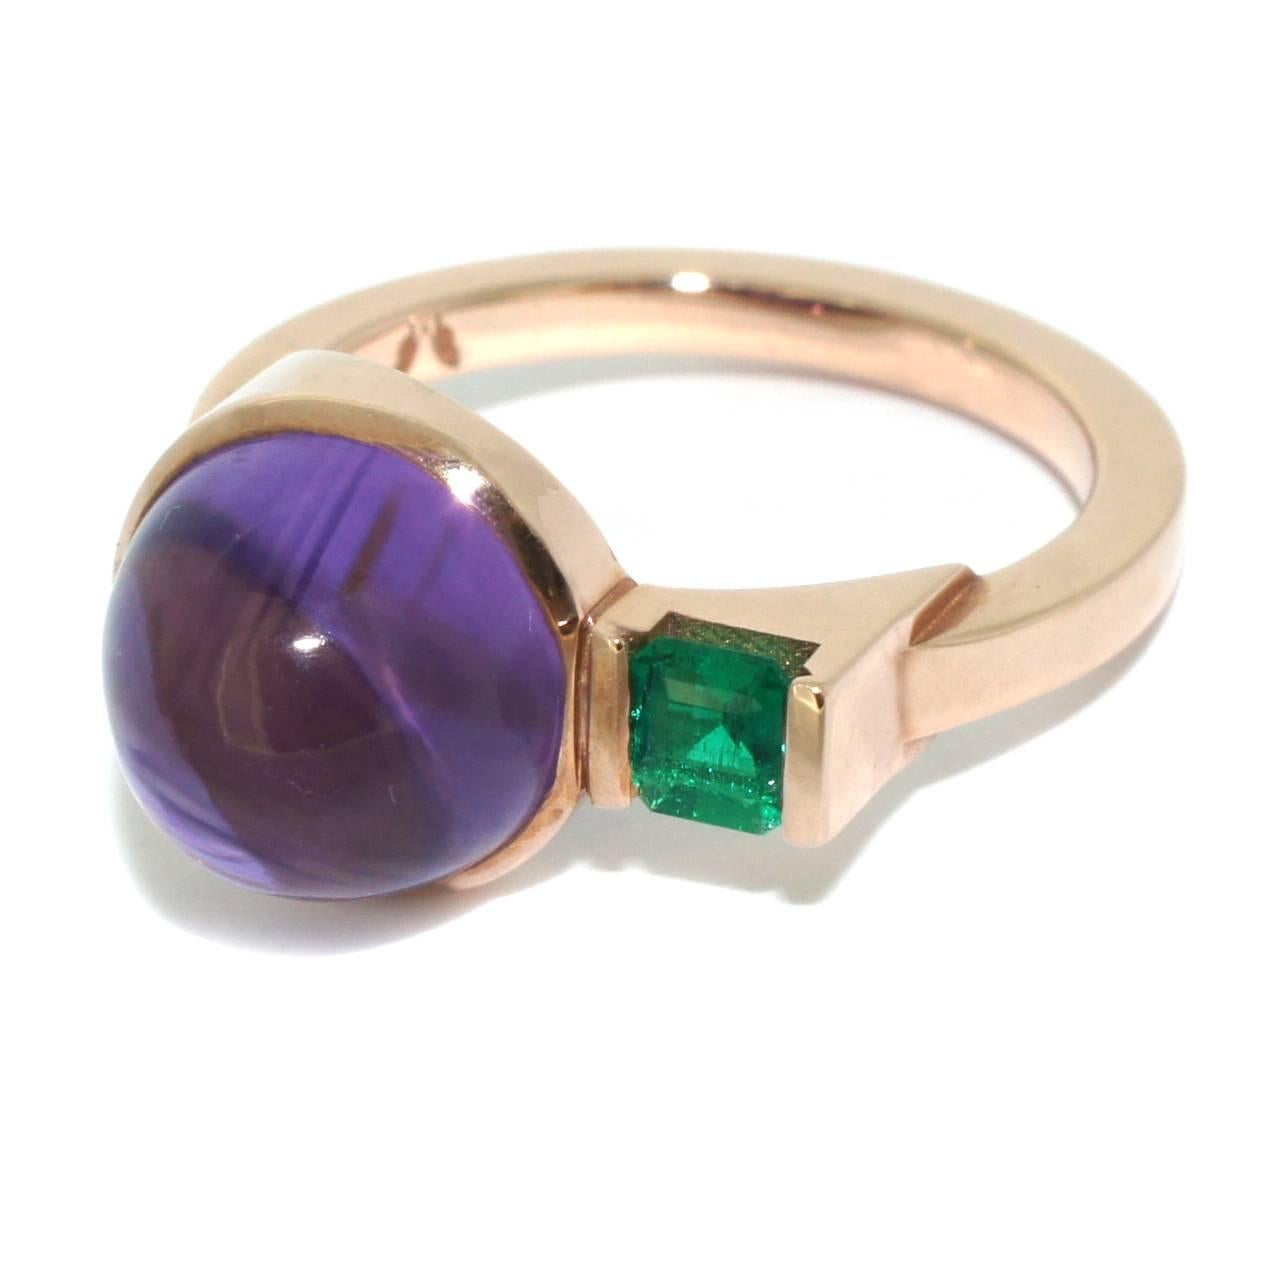 Clean lines of Art Deco architecture were the inspiration behind this ring. A bold combination of a bright green Colombian emerald with a royal purple Brazilian amethyst give this ring a pop of colour. Set in 9 karat rose gold, this ring is modern